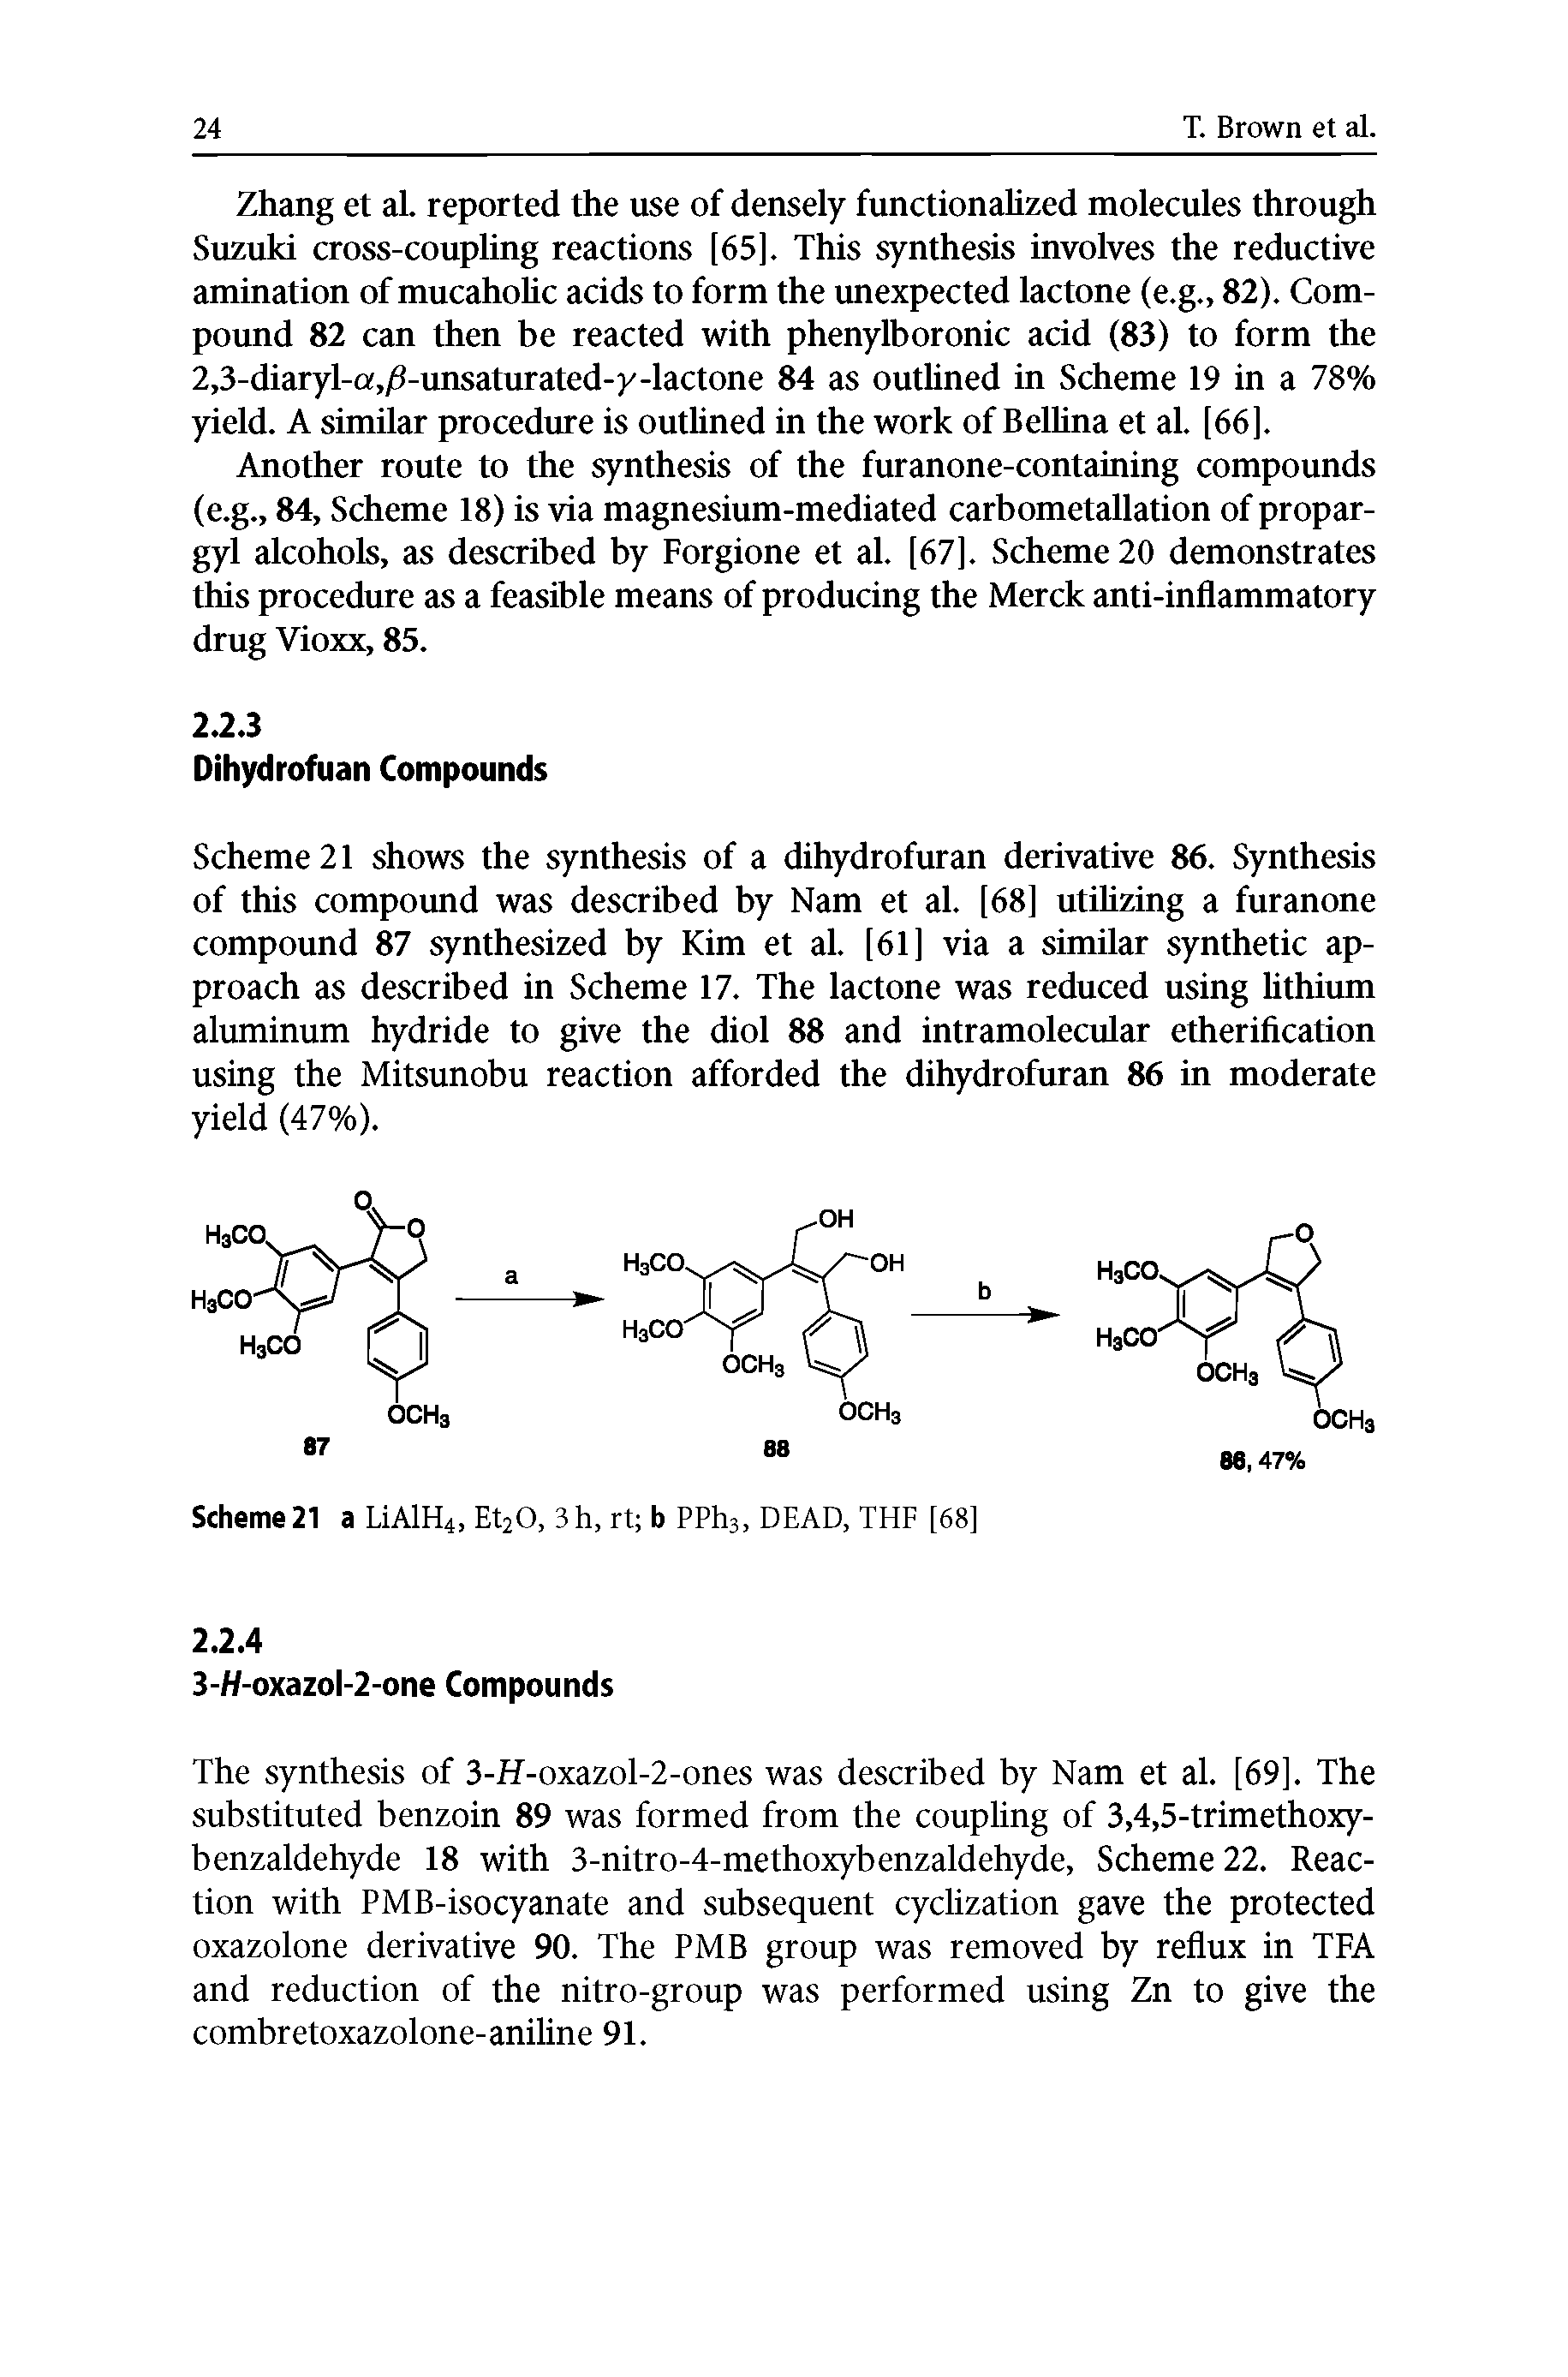 Scheme 21 shows the synthesis of a dihydrofuran derivative 86. Synthesis of this compound was described by Nam et al. [68] utilizing a furanone compound 87 synthesized by Kim et al. [61] via a similar synthetic approach as described in Scheme 17. The lactone was reduced using lithium aluminum hydride to give the diol 88 and intramolecular etherification using the Mitsunobu reaction afforded the dihydrofuran 86 in moderate yield (47%).